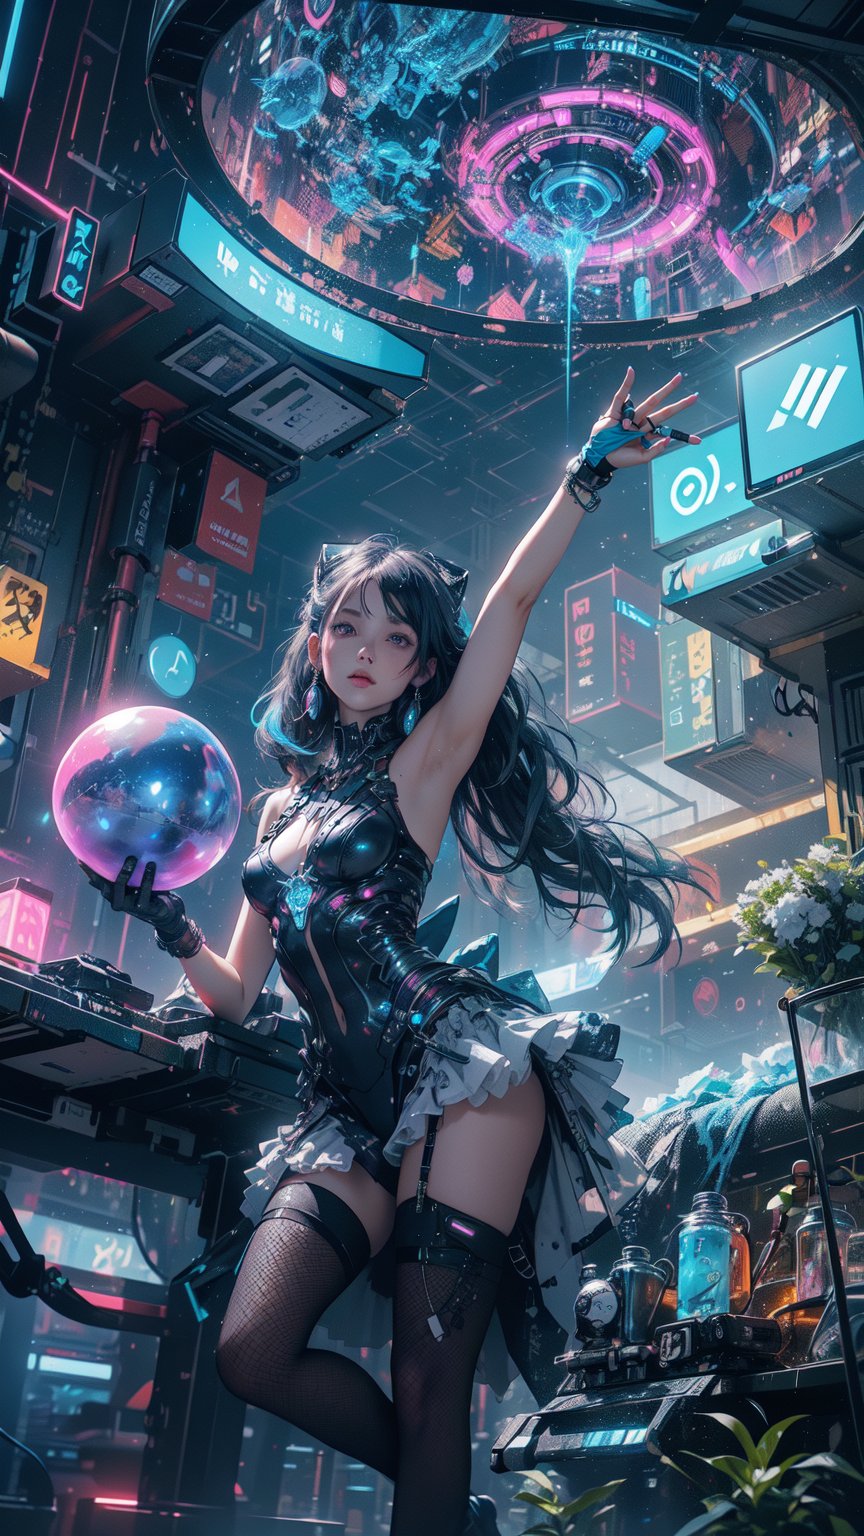 A curious girl with a led ball of vibrant cyber stands amidst a fantastical landscape inspired by cyber led neon lighting cyber city. In the background, few neon signs, cgsociety - n 5, neon sign,neon light, colorful neon signs, gigantic neon signs, neon electronic signs, cyberpunk ,a glowing cyber  cityscape stretches towards the sky,japanese cyber neon signs, cyber led neon lighting,illuminated by an ethereal blue light. , as if showcasing her own little patch of wonder in this surreal science fiction world.,cool